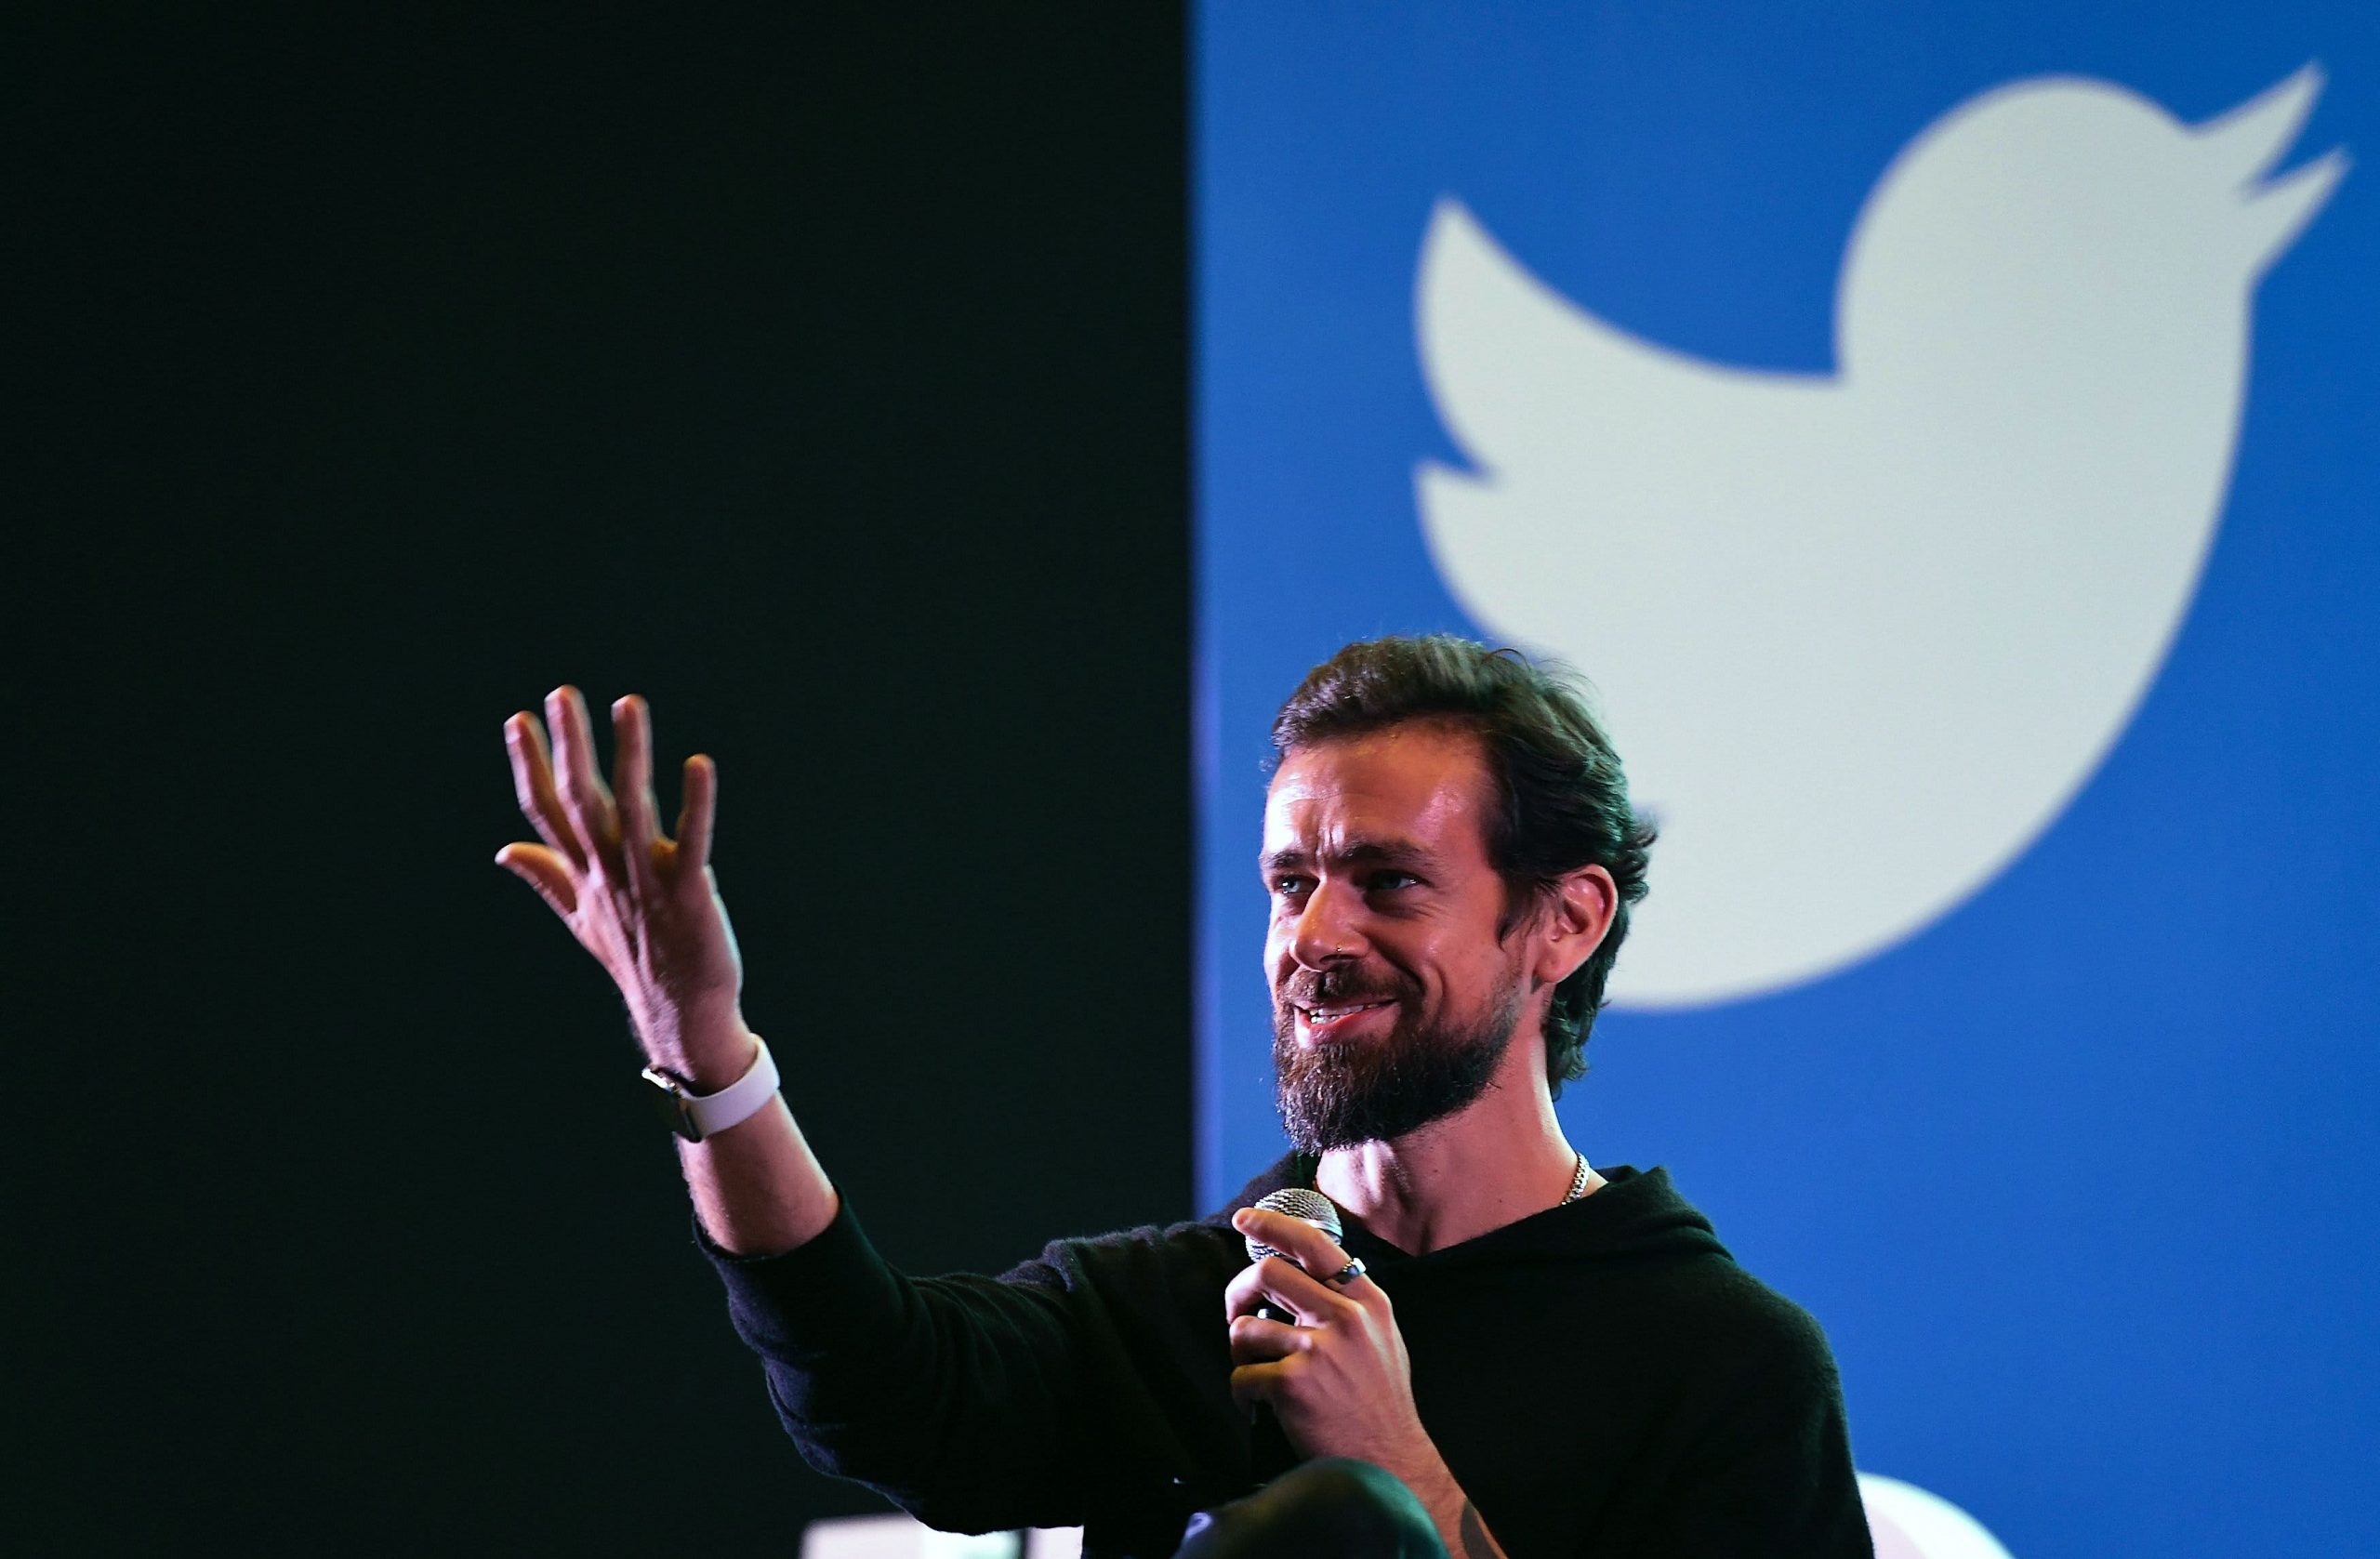 Jack Dorsey is offering to sell the first tweet as an NFT and the highest bid is $2.5 million